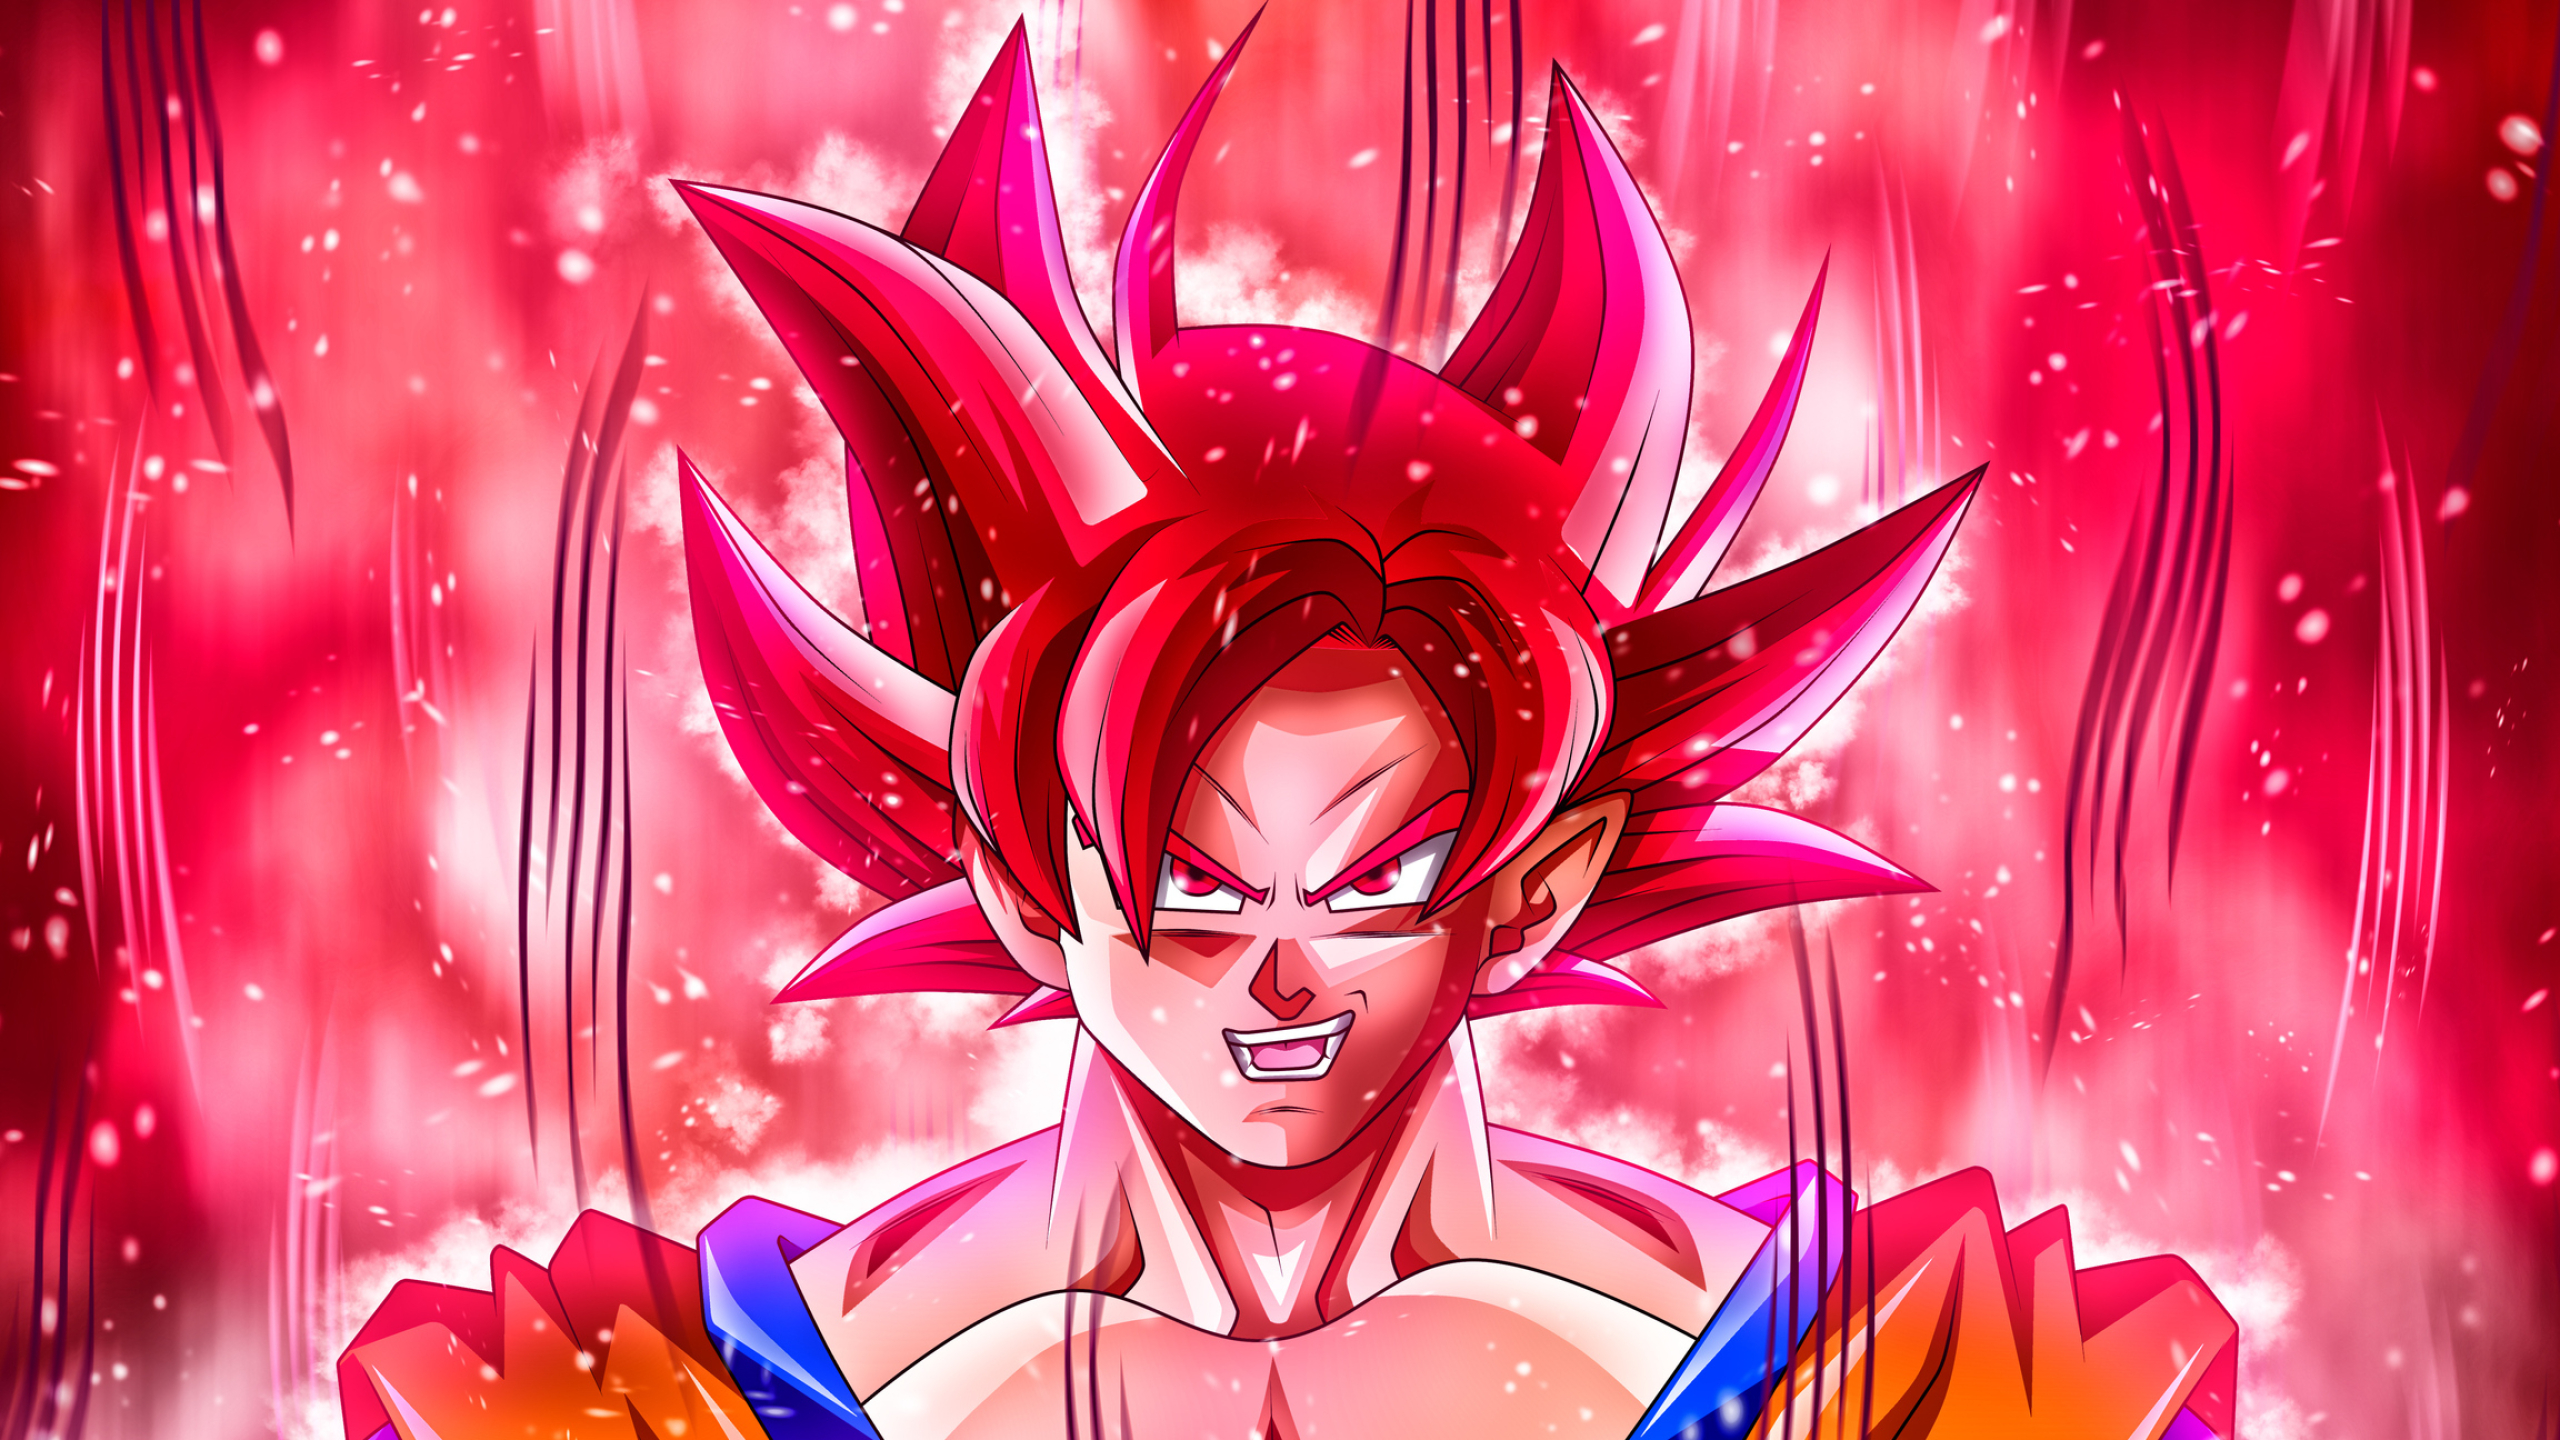 2560x1440 Goku Super Saiyan God 5k 1440P Resolution HD 4k Wallpapers, Images, Backgrounds, Photos and Pictures